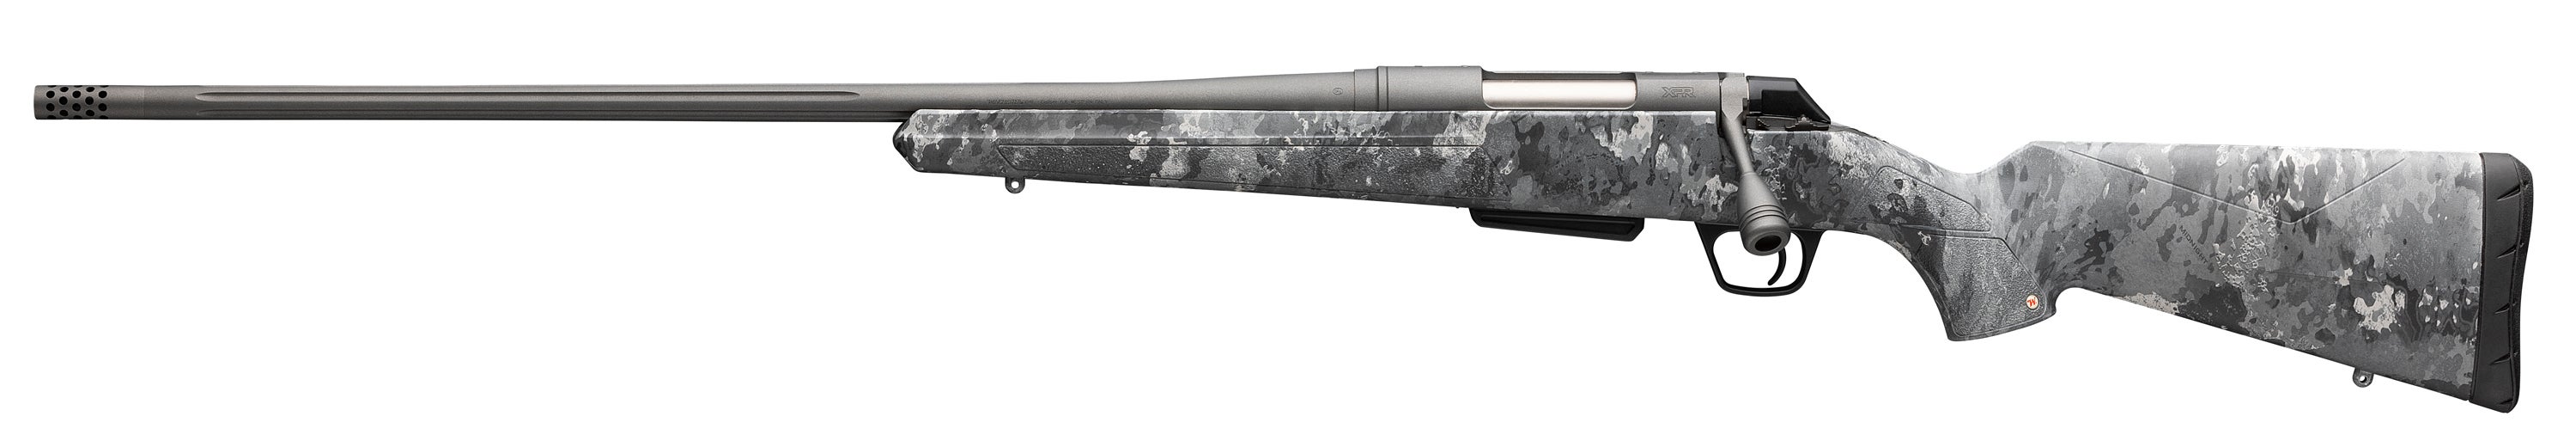 xpr-rifle-extreme-mb-left-hand-truetimber-midnight-535781299-1